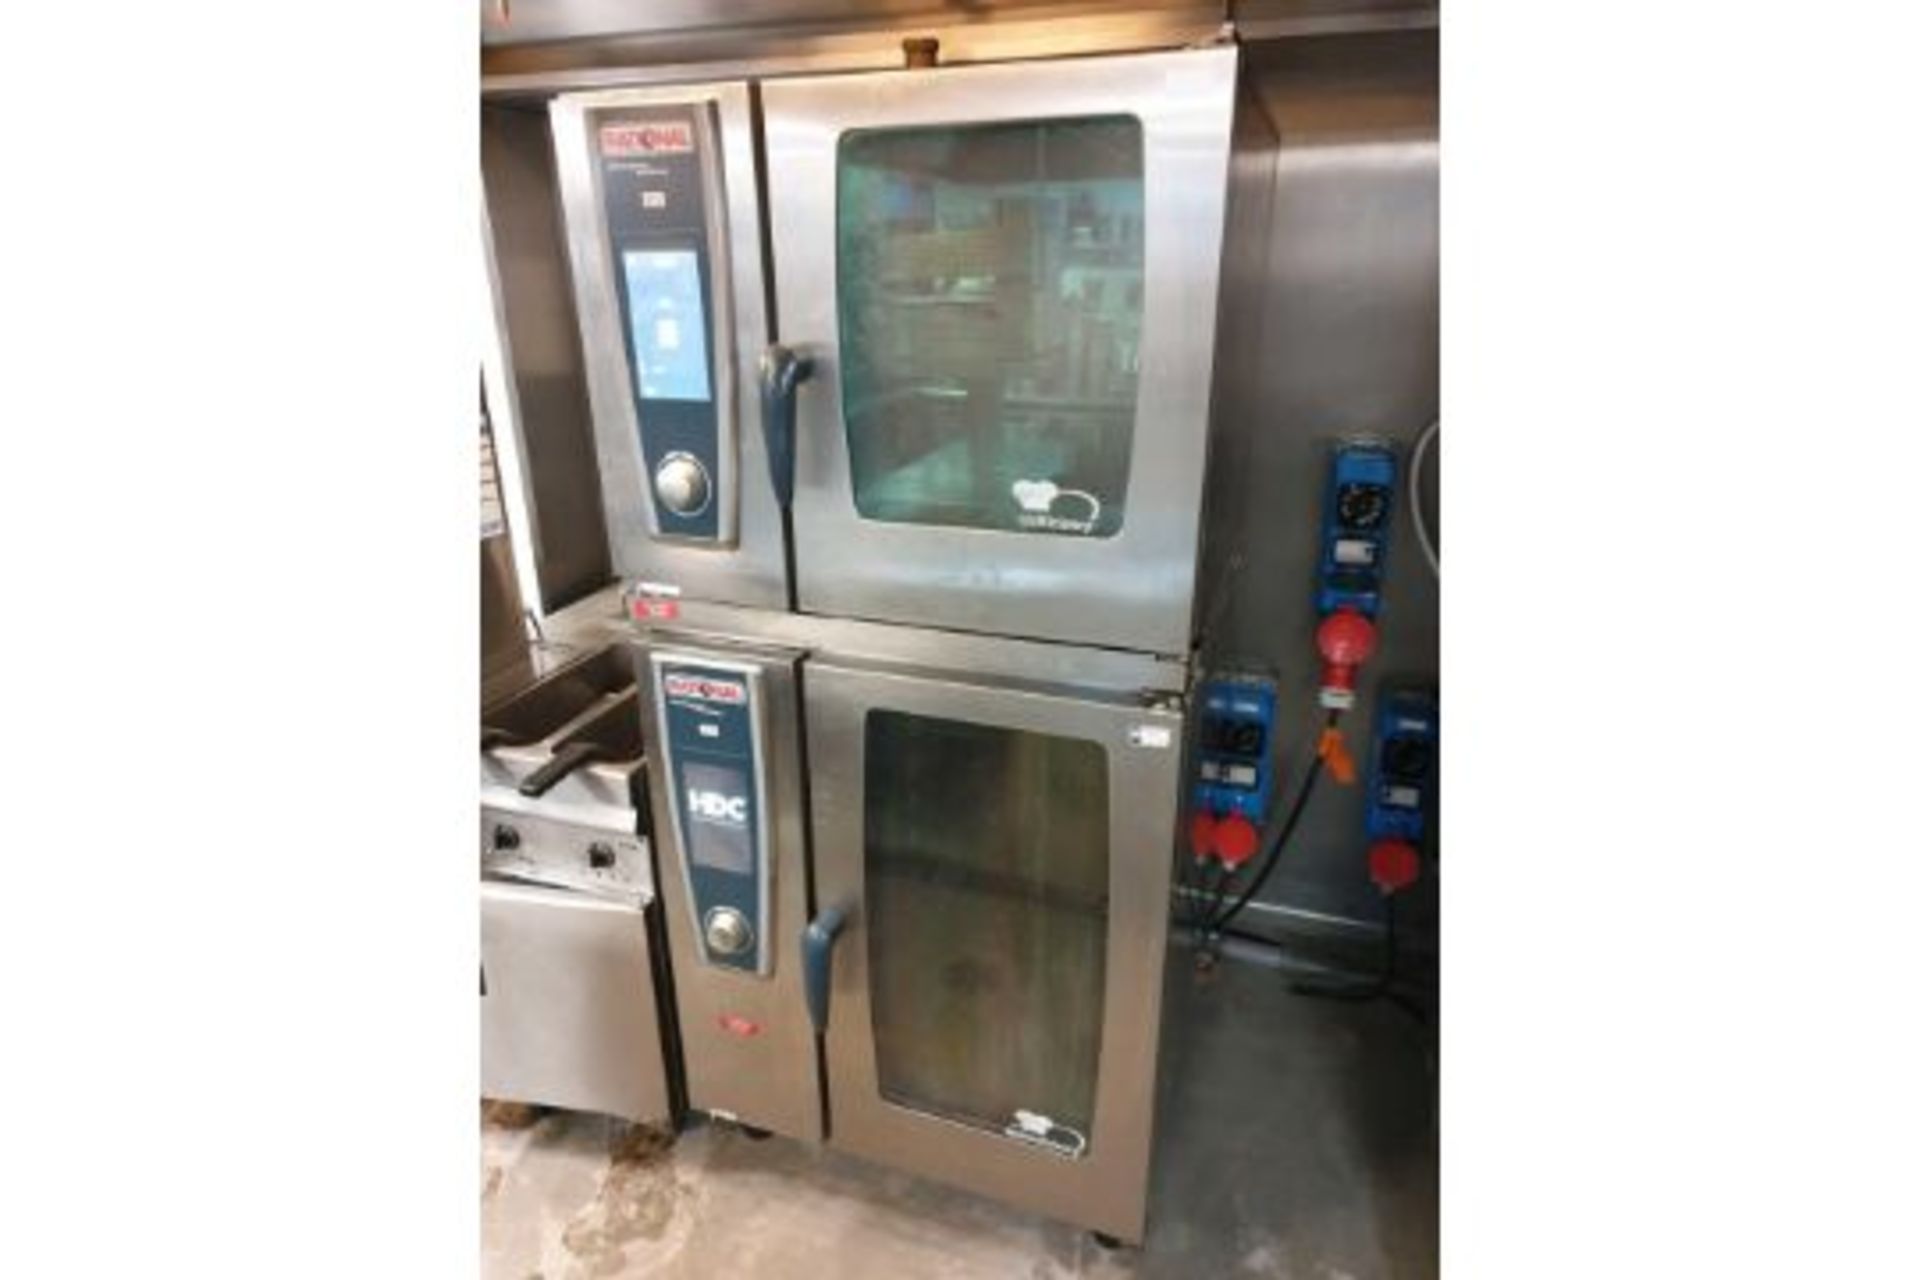 Rational White Efficiency Dual SCCWE61 / SCCWE101 3 Phase Electric Self Cooking Center / Combination - Bild 2 aus 2